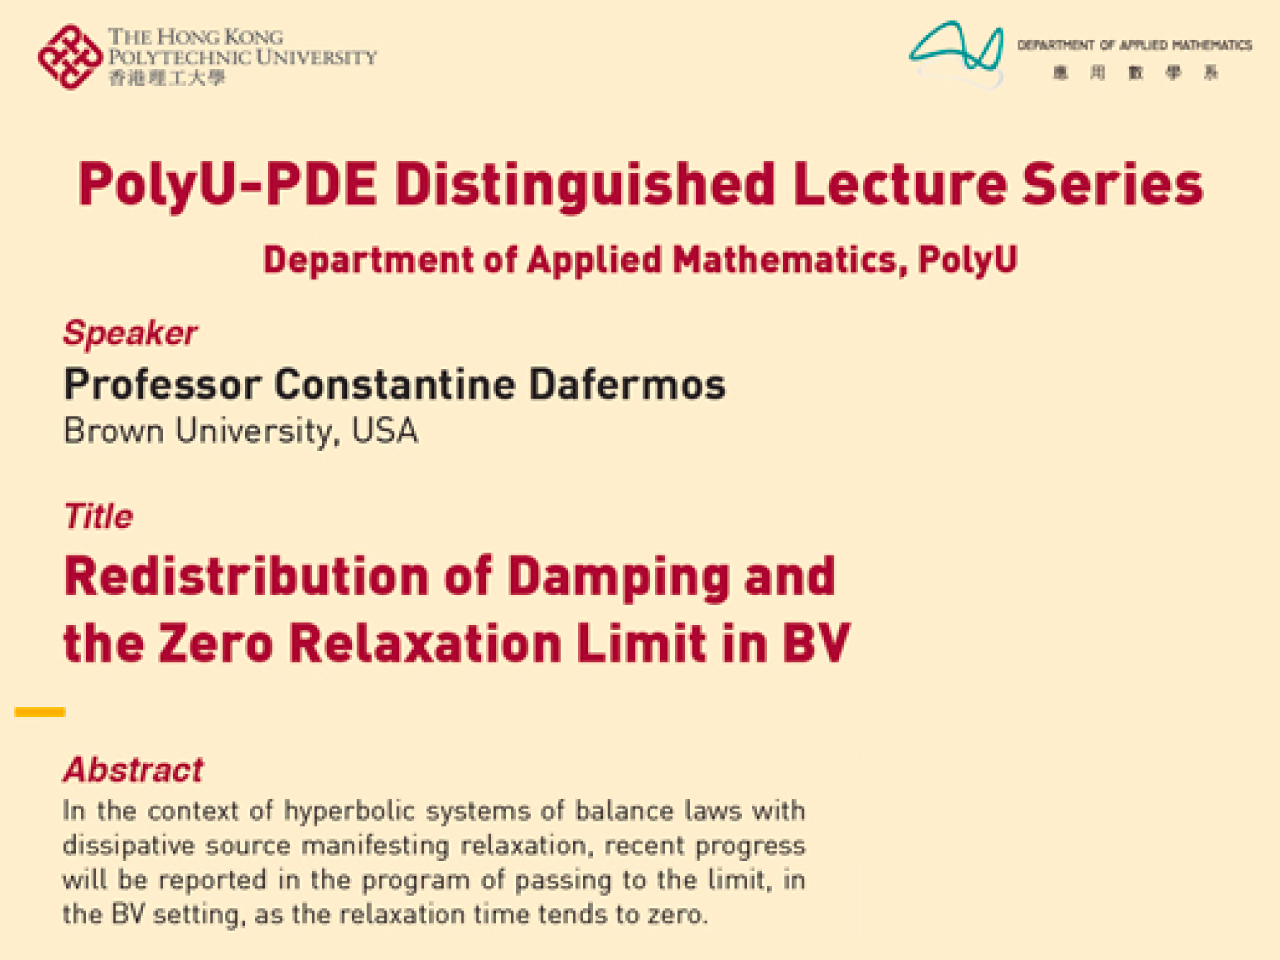 PolyU-PDE distinguished lecture series: redistribution of damping and the zero relaxation limit in BV